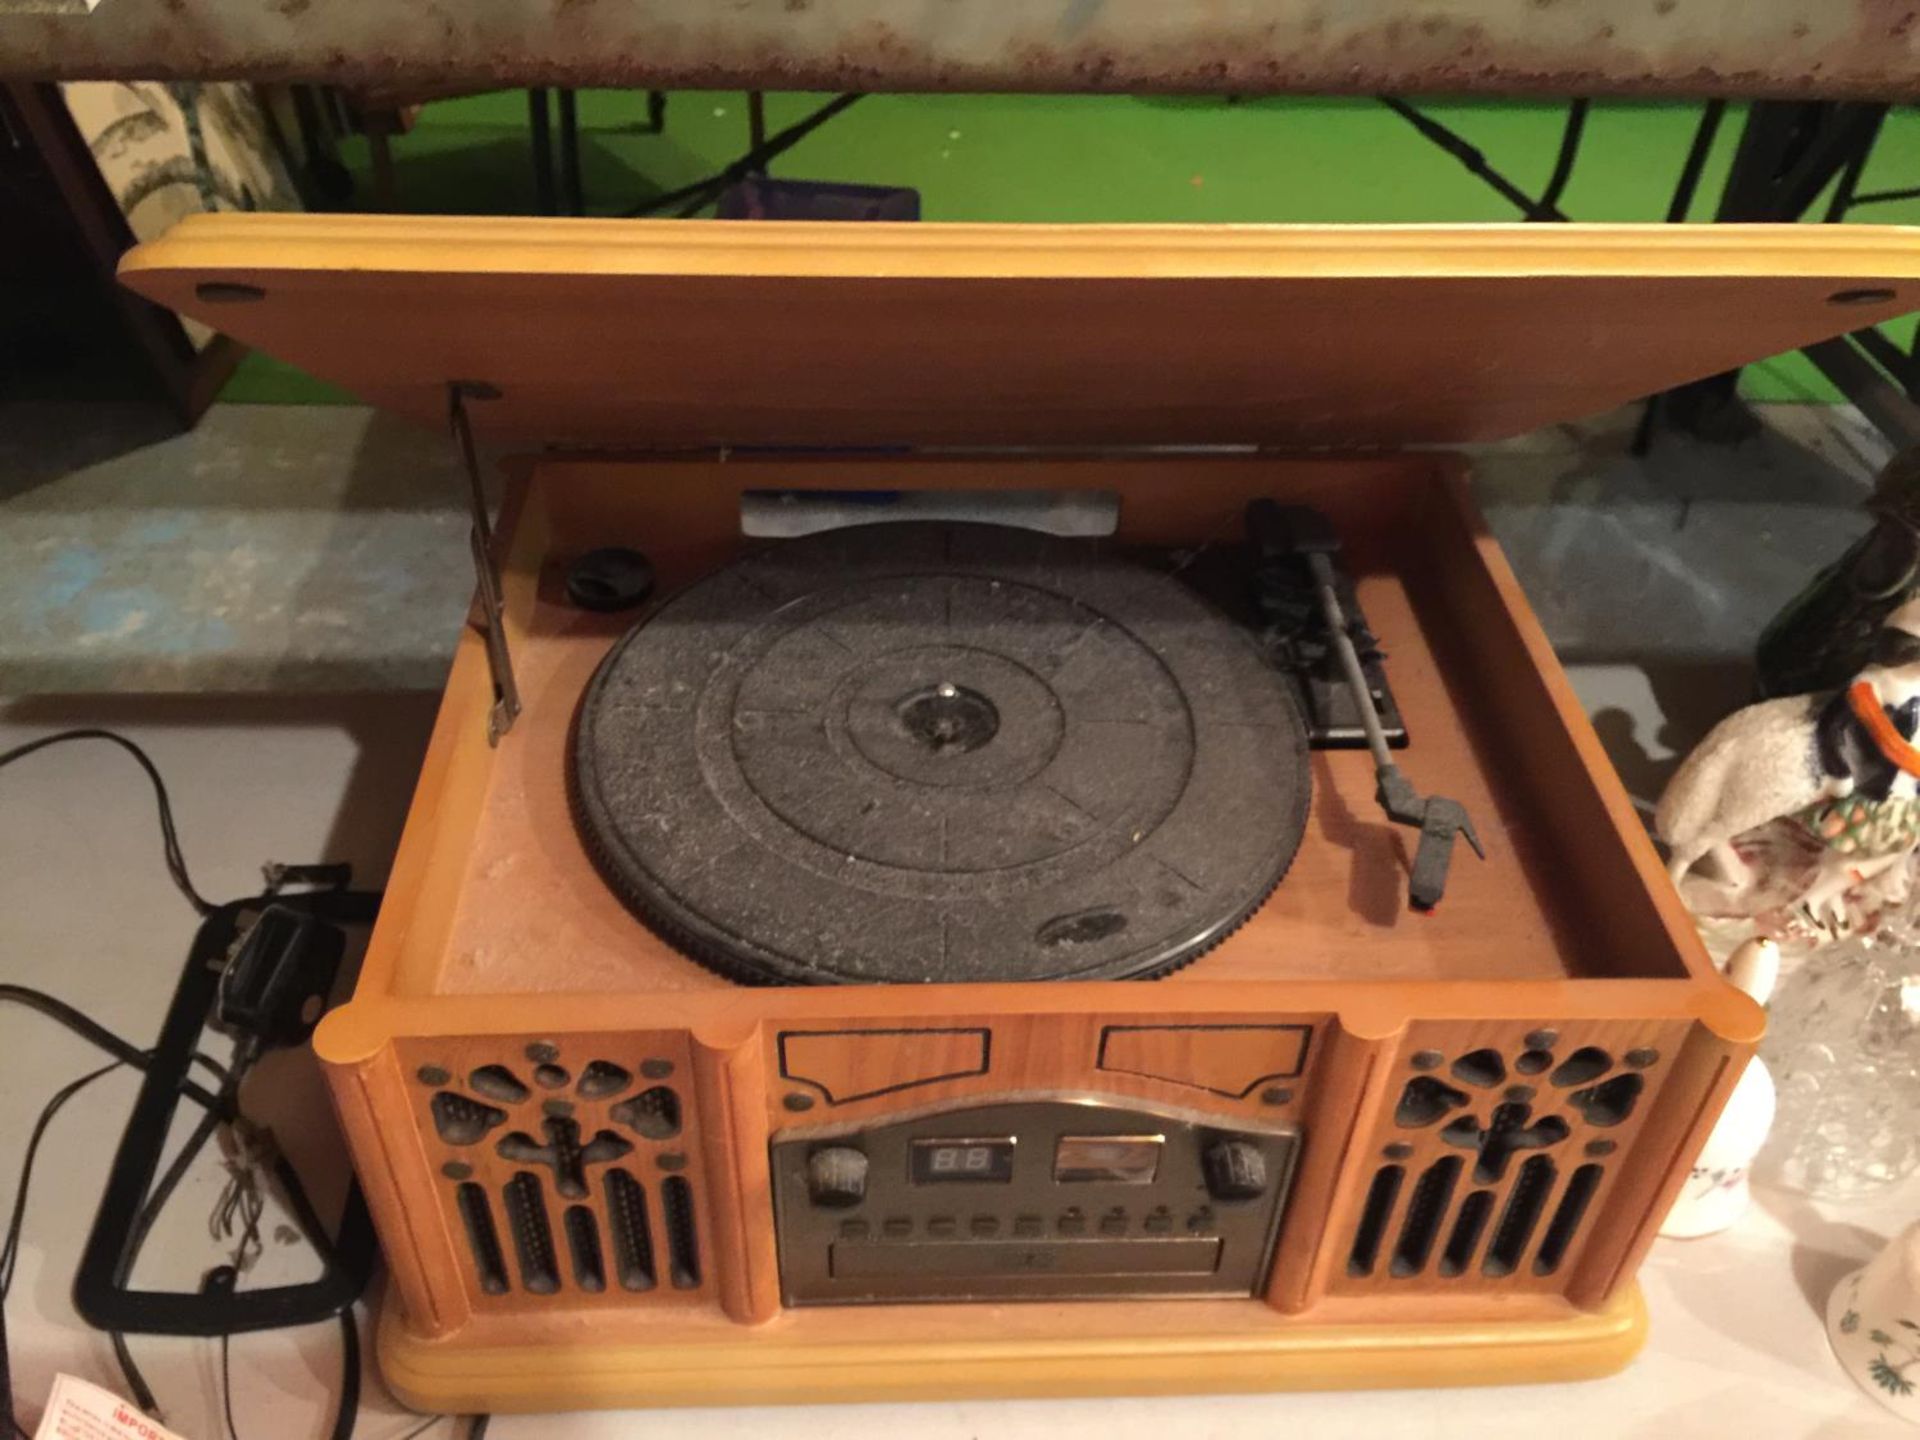 A VINTAGE STYLE MODERN CASED RECORD PLAYER INCORPORATING A CD AND A RADIO - Image 3 of 3